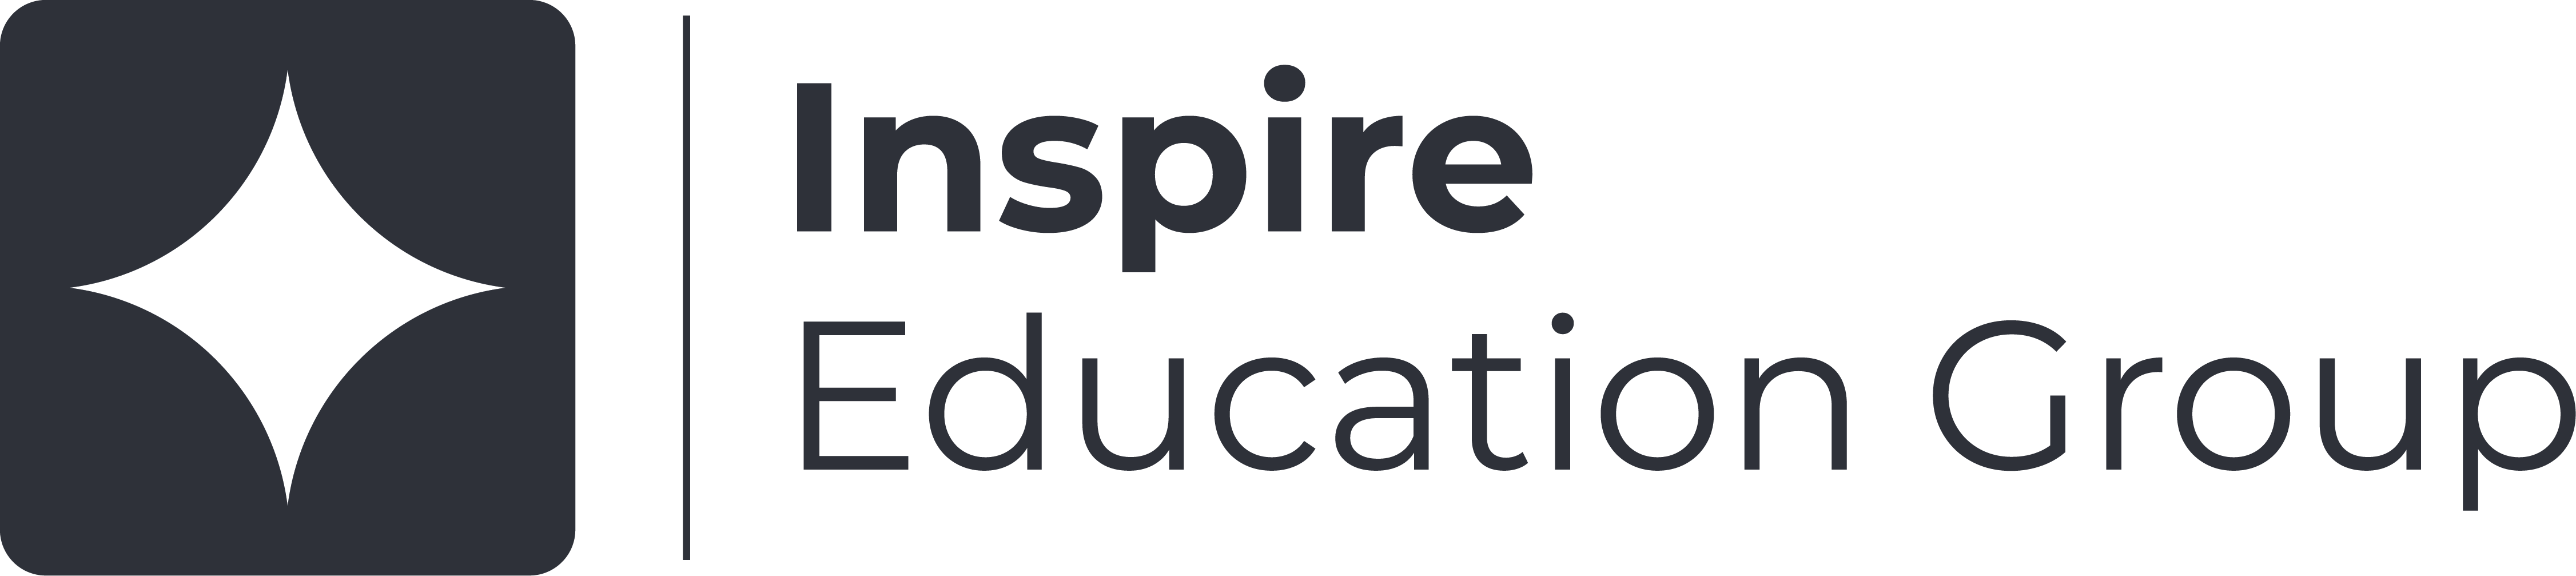 Inspire Education Group - Governor